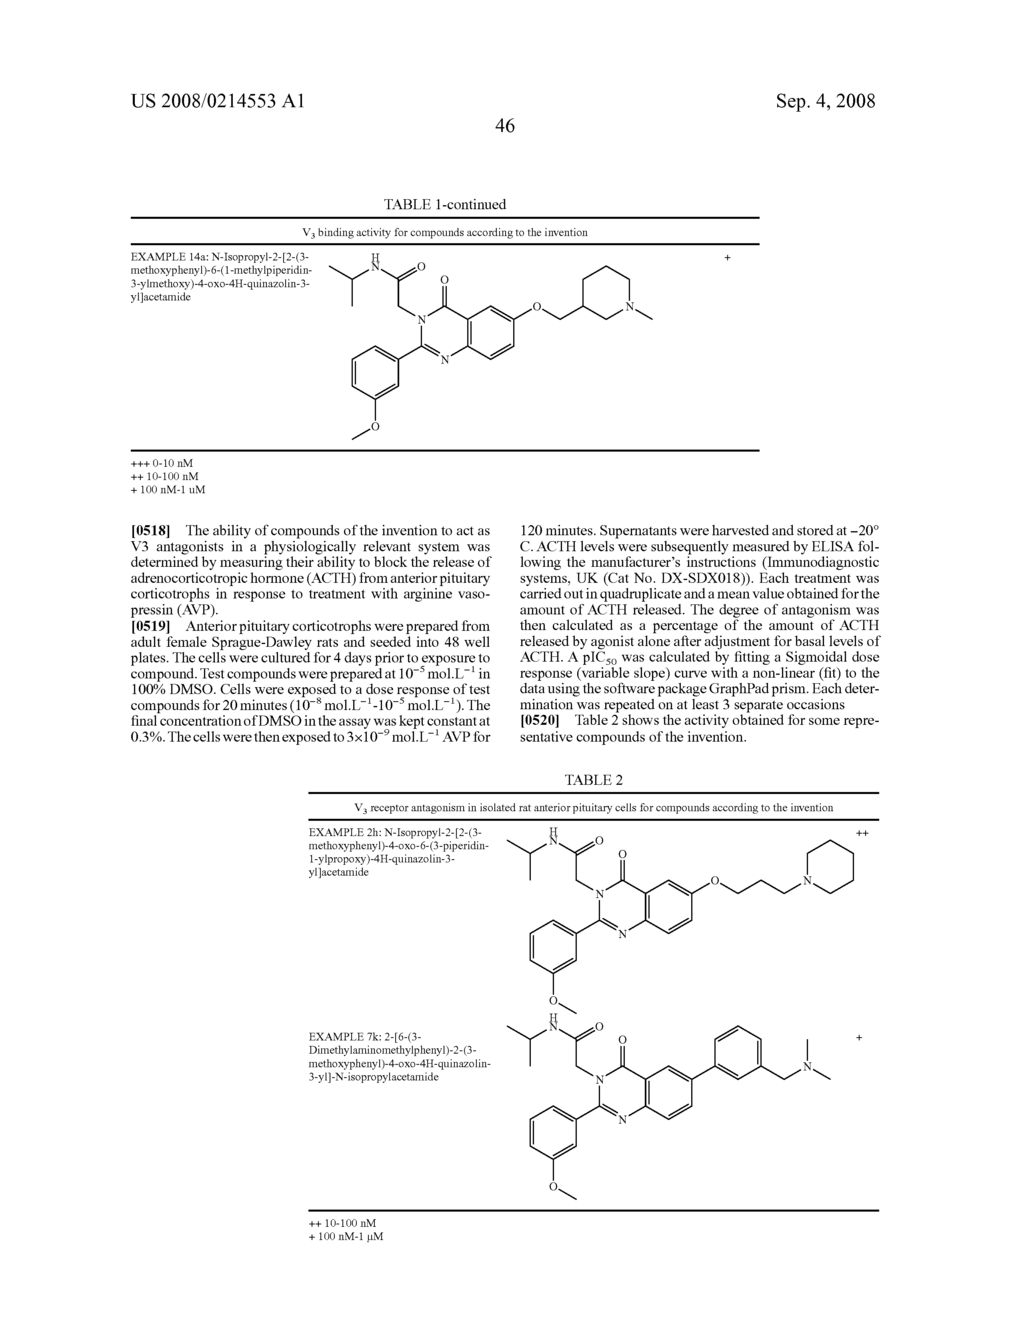 2-(4-Oxo-4H-Quinazolin-3-Yl) Acetamides and Their Use as Vasopressin V3 Antagonists - diagram, schematic, and image 47